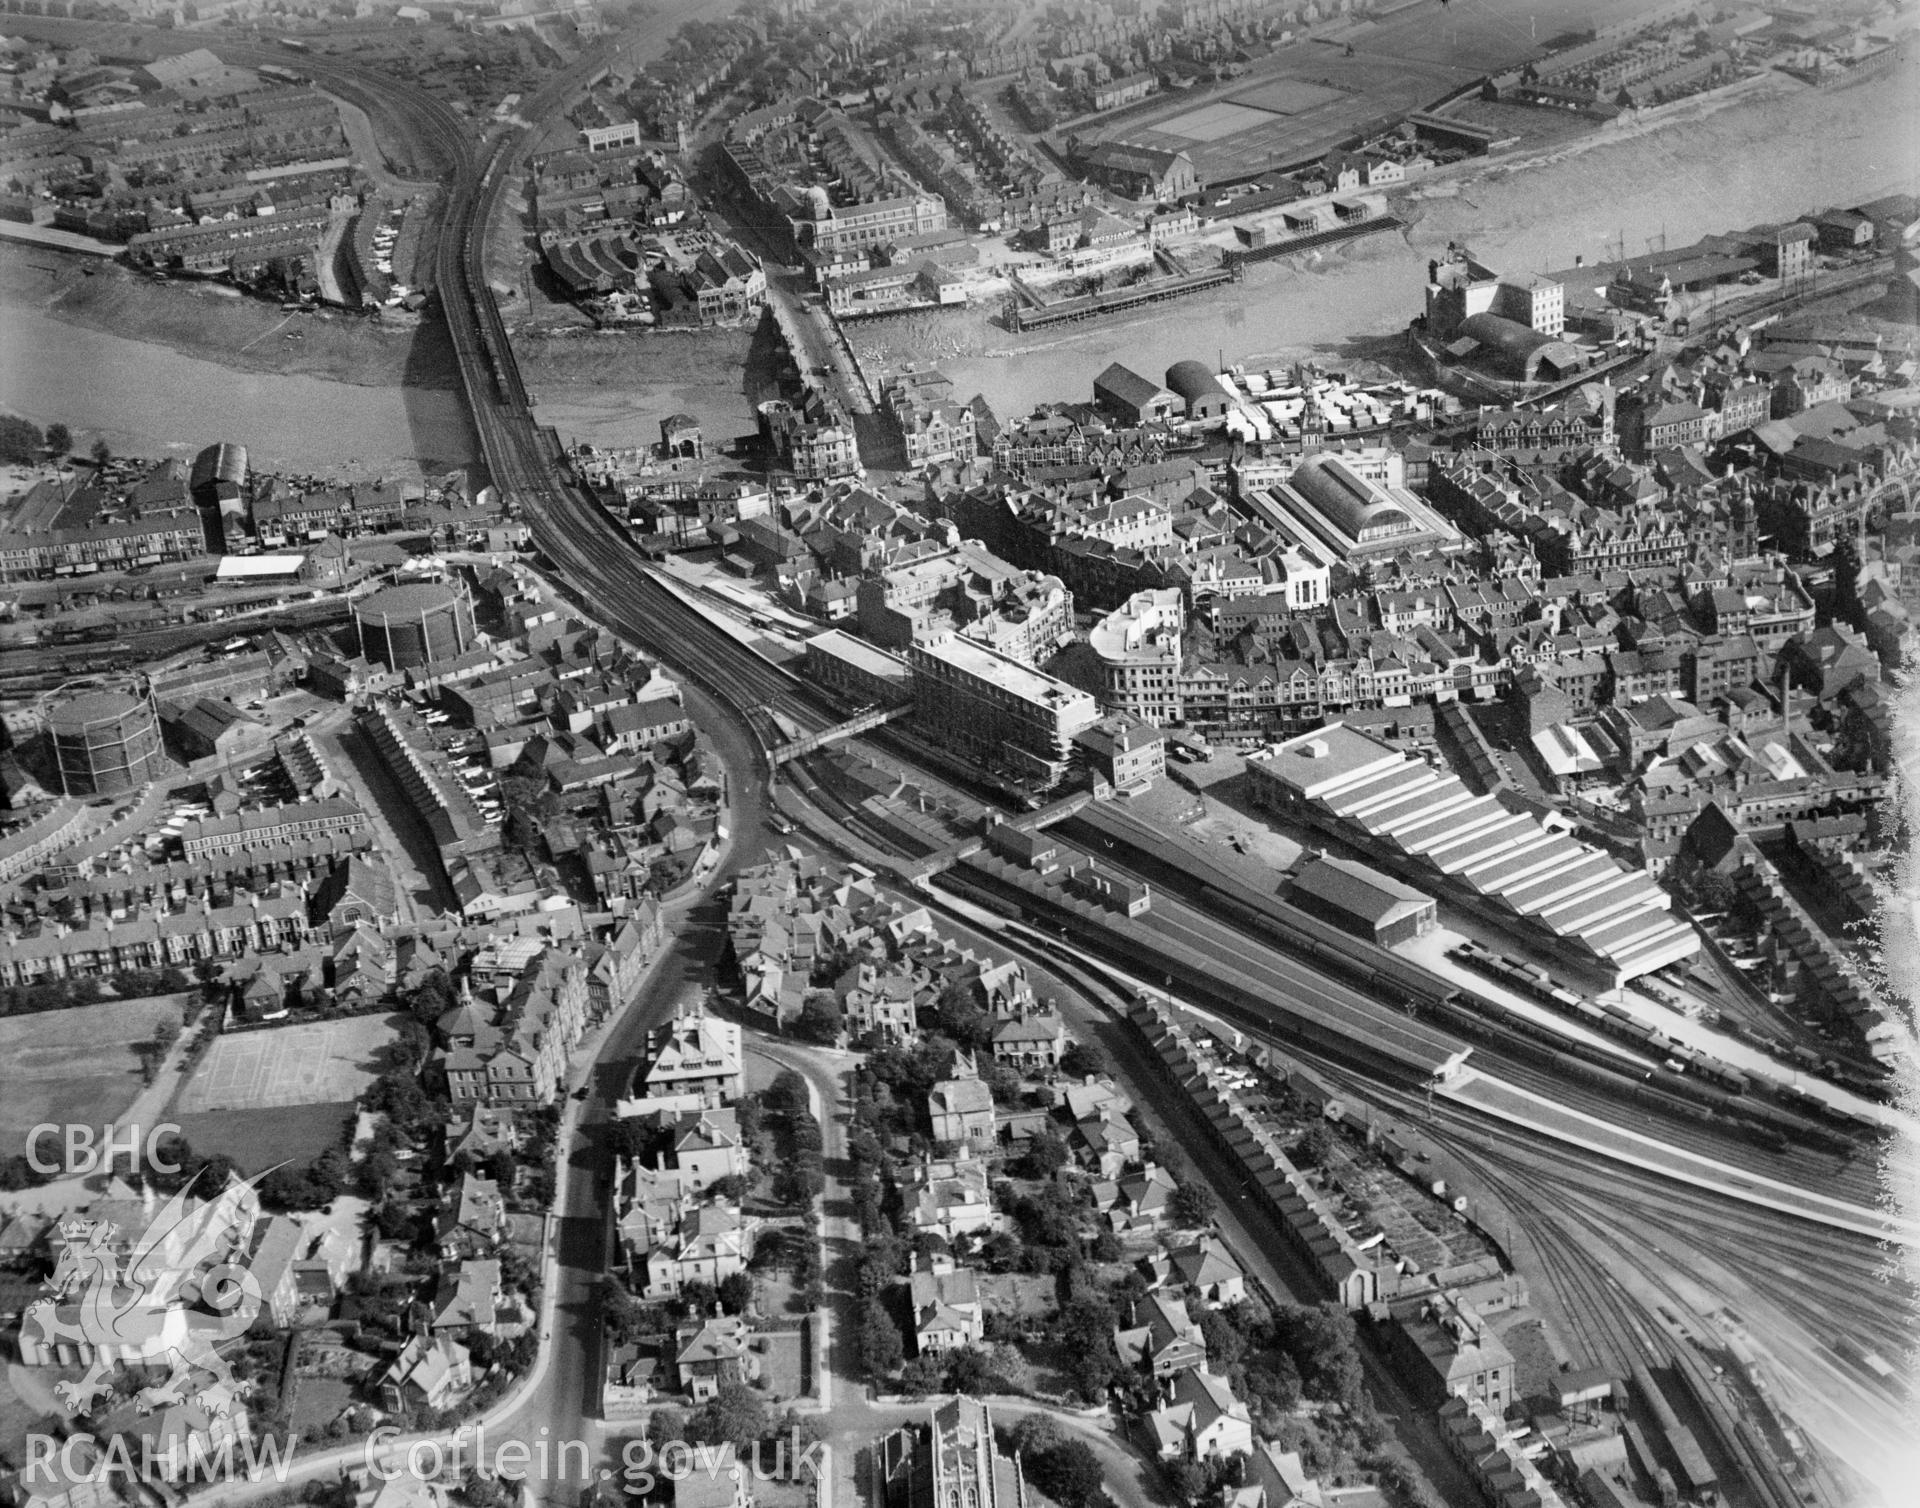 General view of Newport showing railway station, oblique aerial view. 5?x4? black and white glass plate negative.